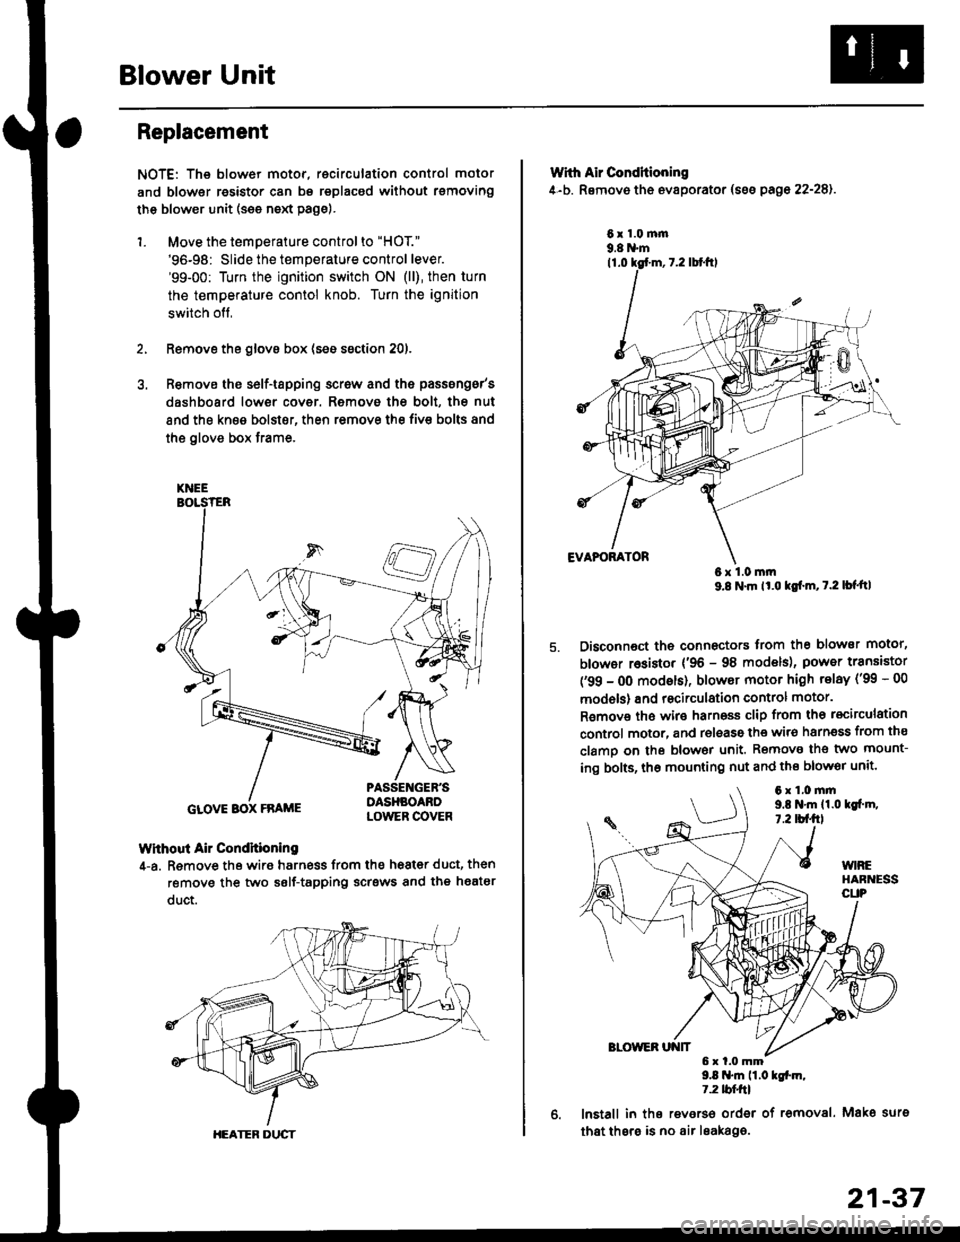 HONDA CIVIC 1997 6.G Workshop Manual Blower Unit
Replacement
NOTE: The blower motor, recirculation control motor
and blower resistor can bs replacsd without rsmoving
th€ blower unit (see neld Page).
1. Move the temperature control to "